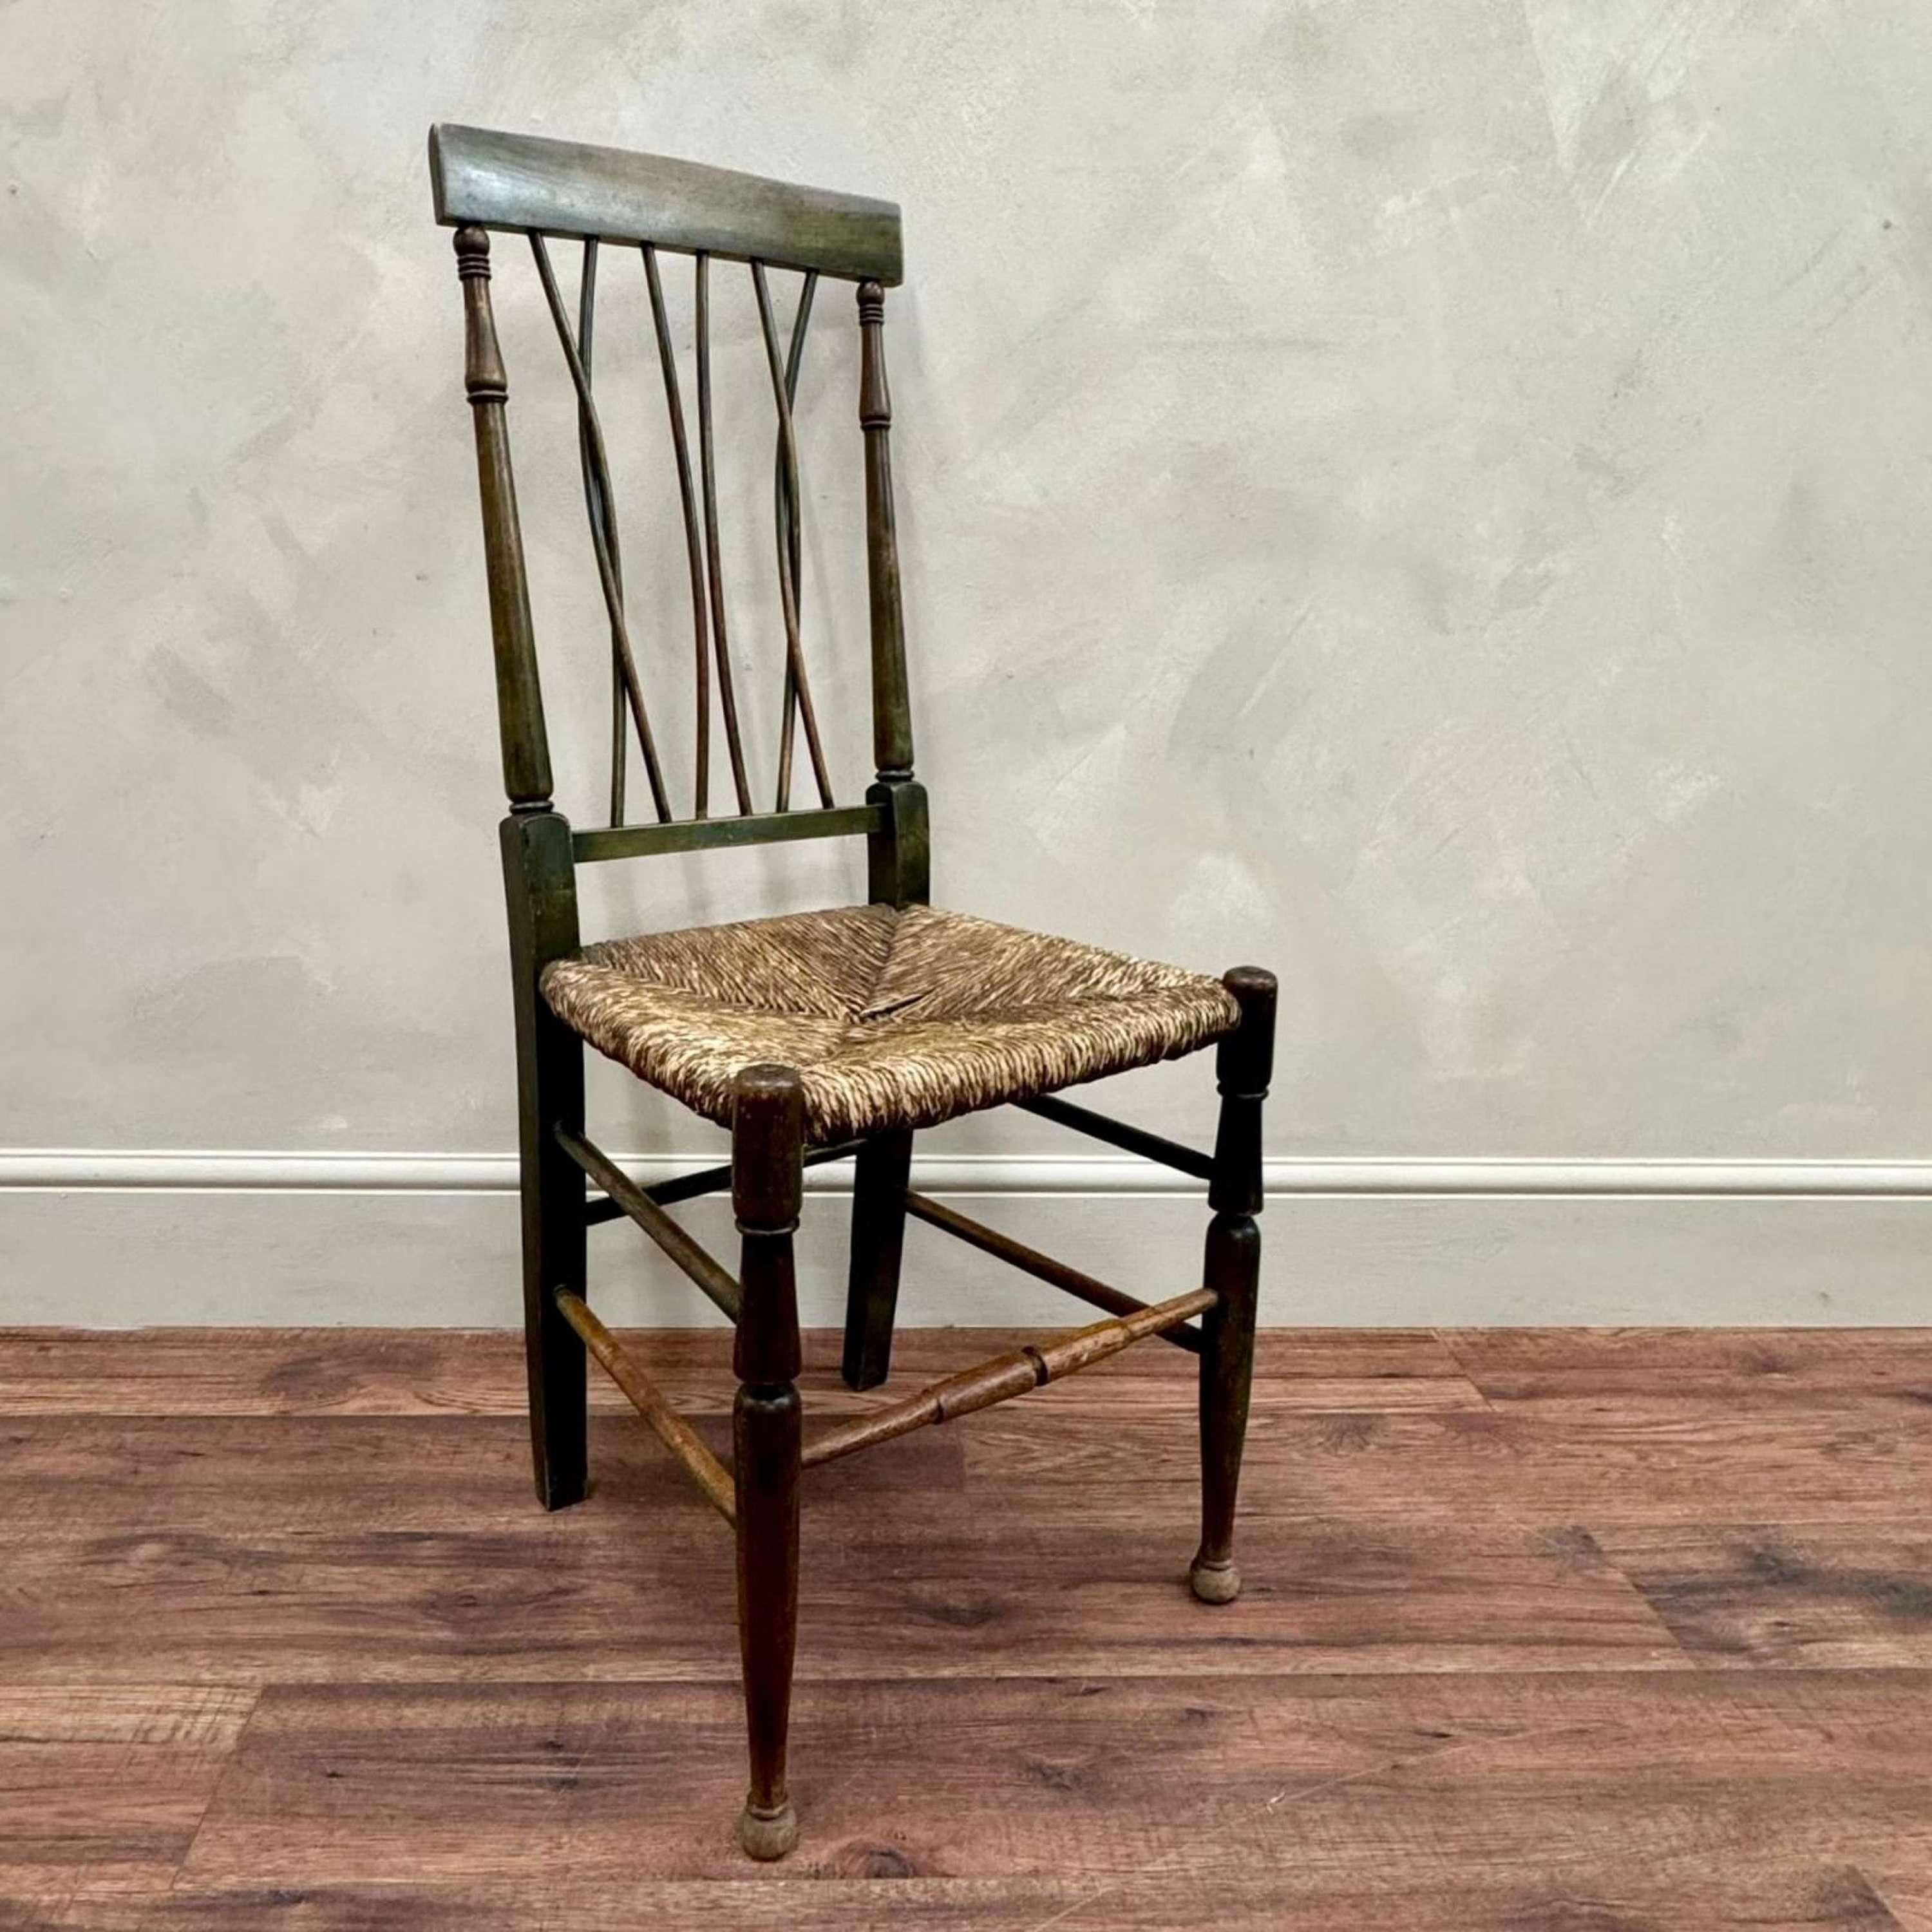 Wonderful arts and crafts rush seated chair with original green paint.
Entwined, bentwood splat, solid seat.
Originally found in a house in Cornwall where it had been for many years.
France, circa, 1900.

Back Height - 102 cm
Depth - 47.5 cm
Seat